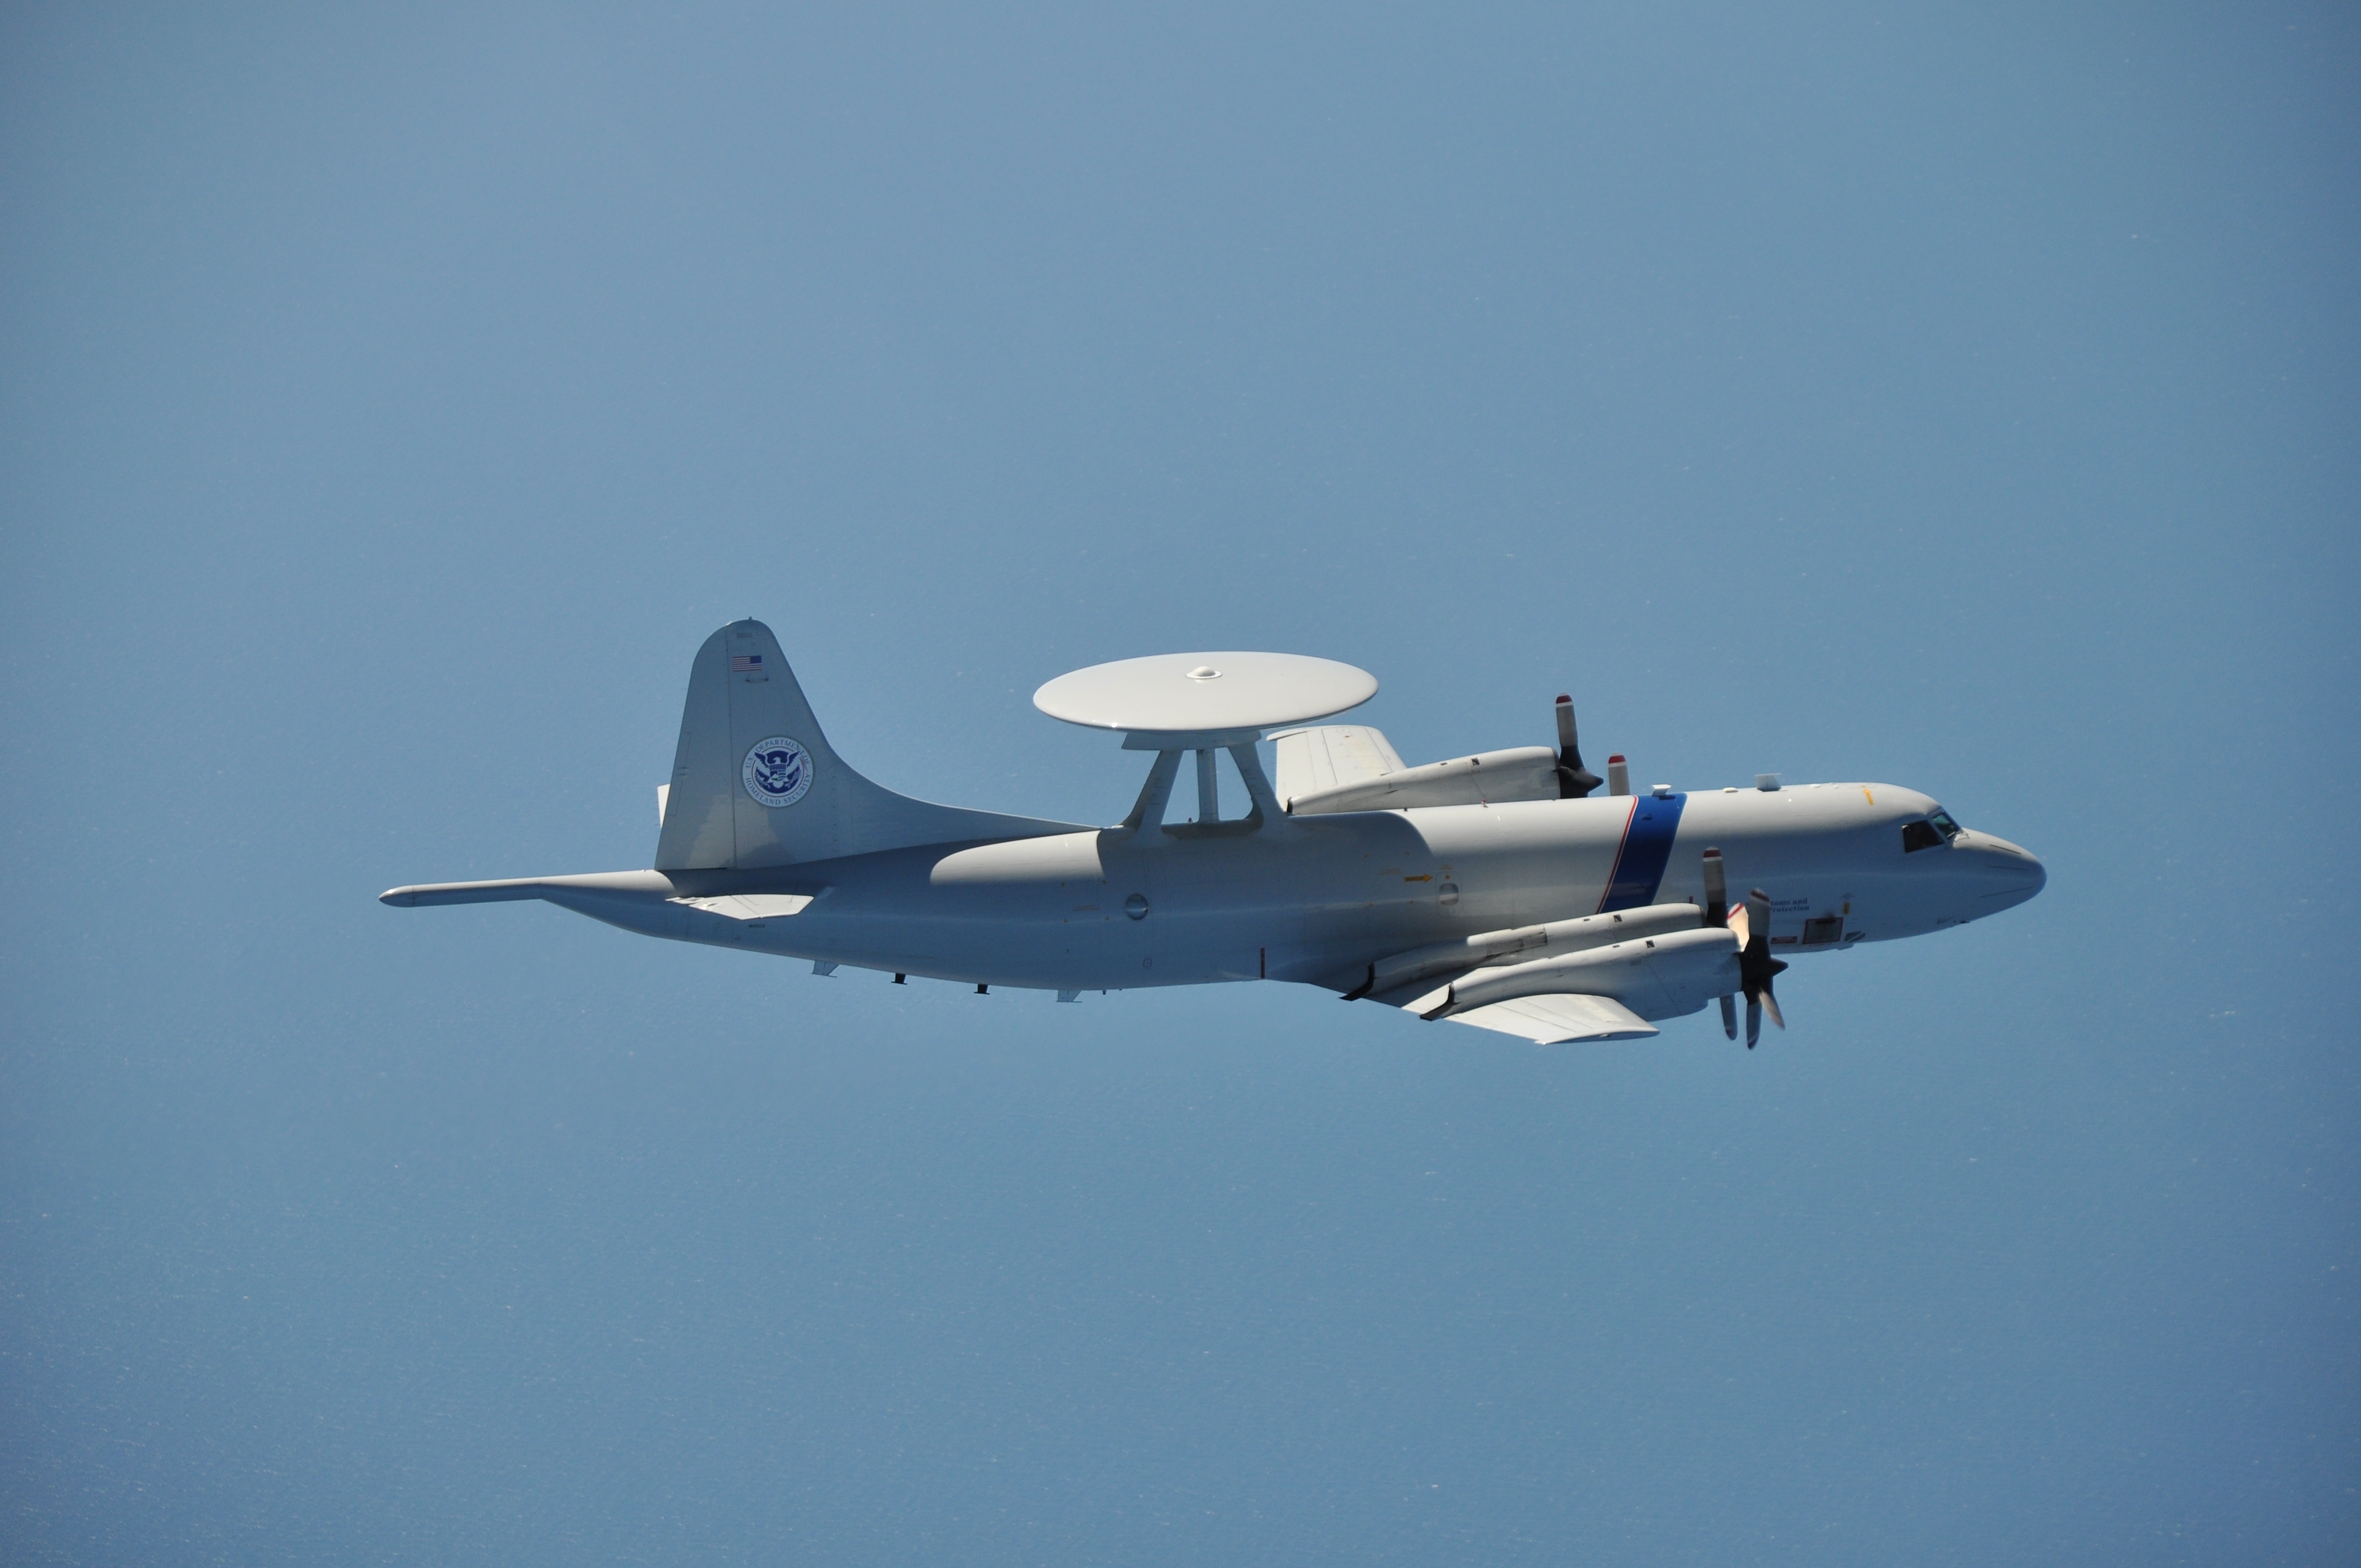 The P-3 Airborne Early Warning Aircraft is utilized primarily for long-range patrols along the entire U.S. border, and in source and transit zone countries, throughout Central and South America.